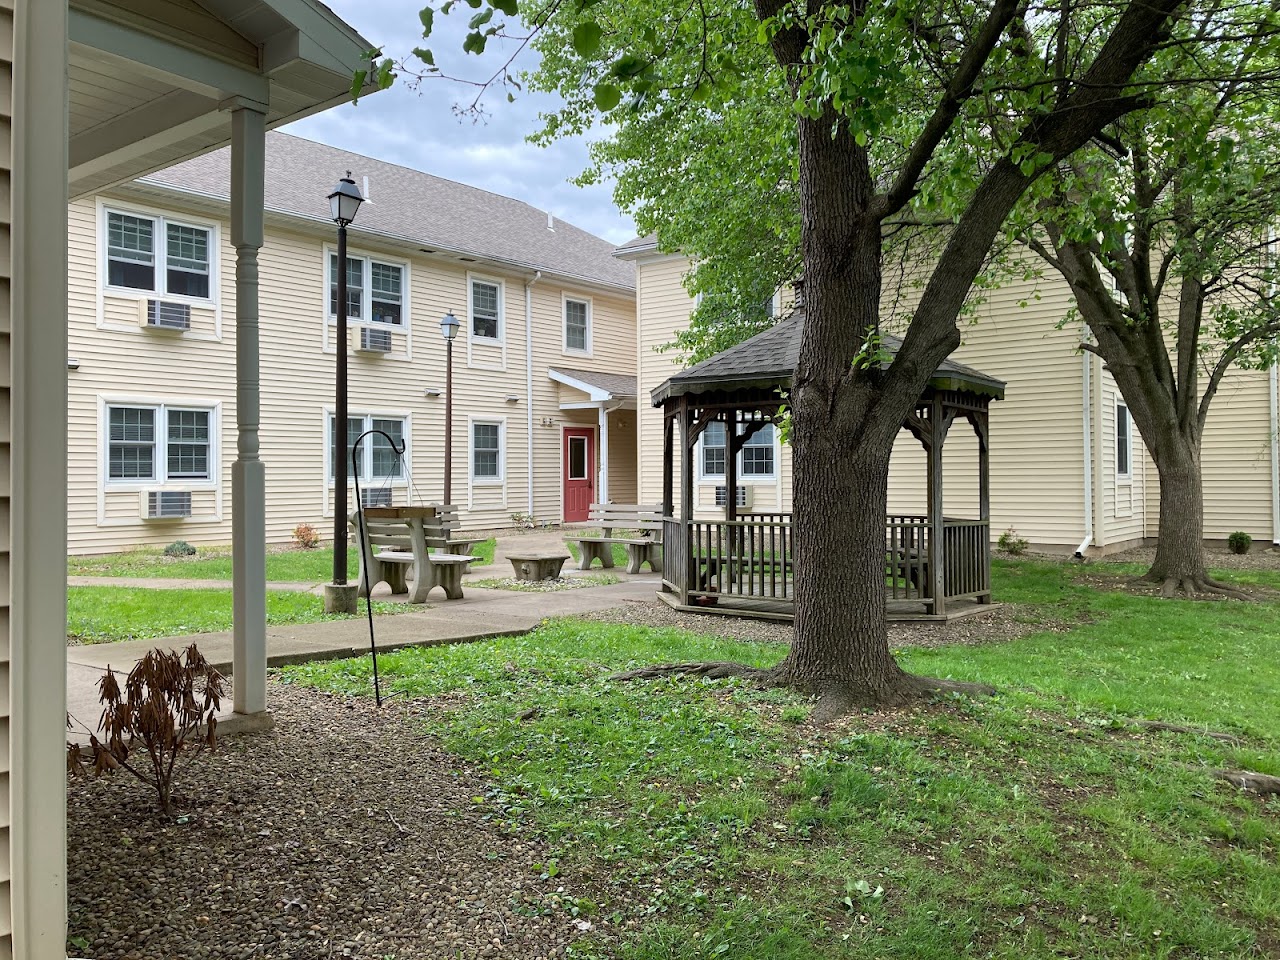 Photo of ANTHONY COURT. Affordable housing located at 345 IRON ST BLOOMSBURG, PA 17815